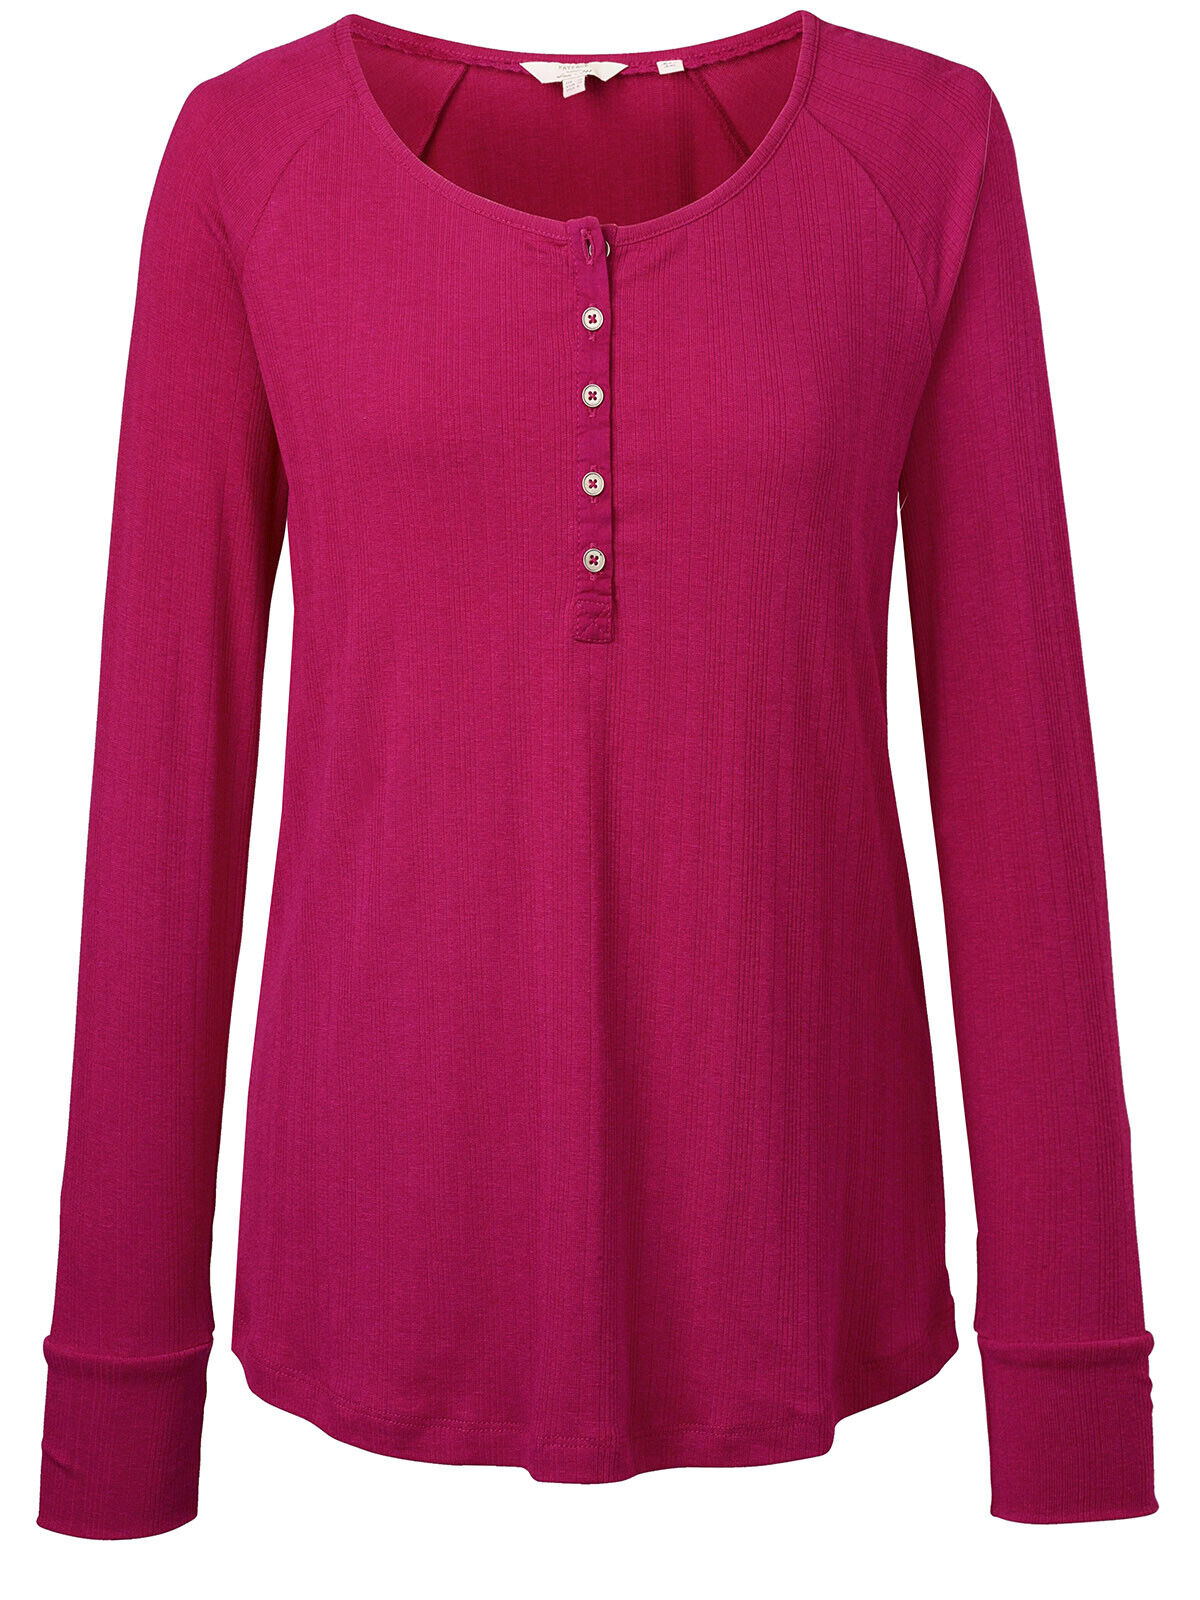 EX Fat Face Rose Red Skye Rib Henley T-Shirt in Sizes 8 or 12 RRP £26